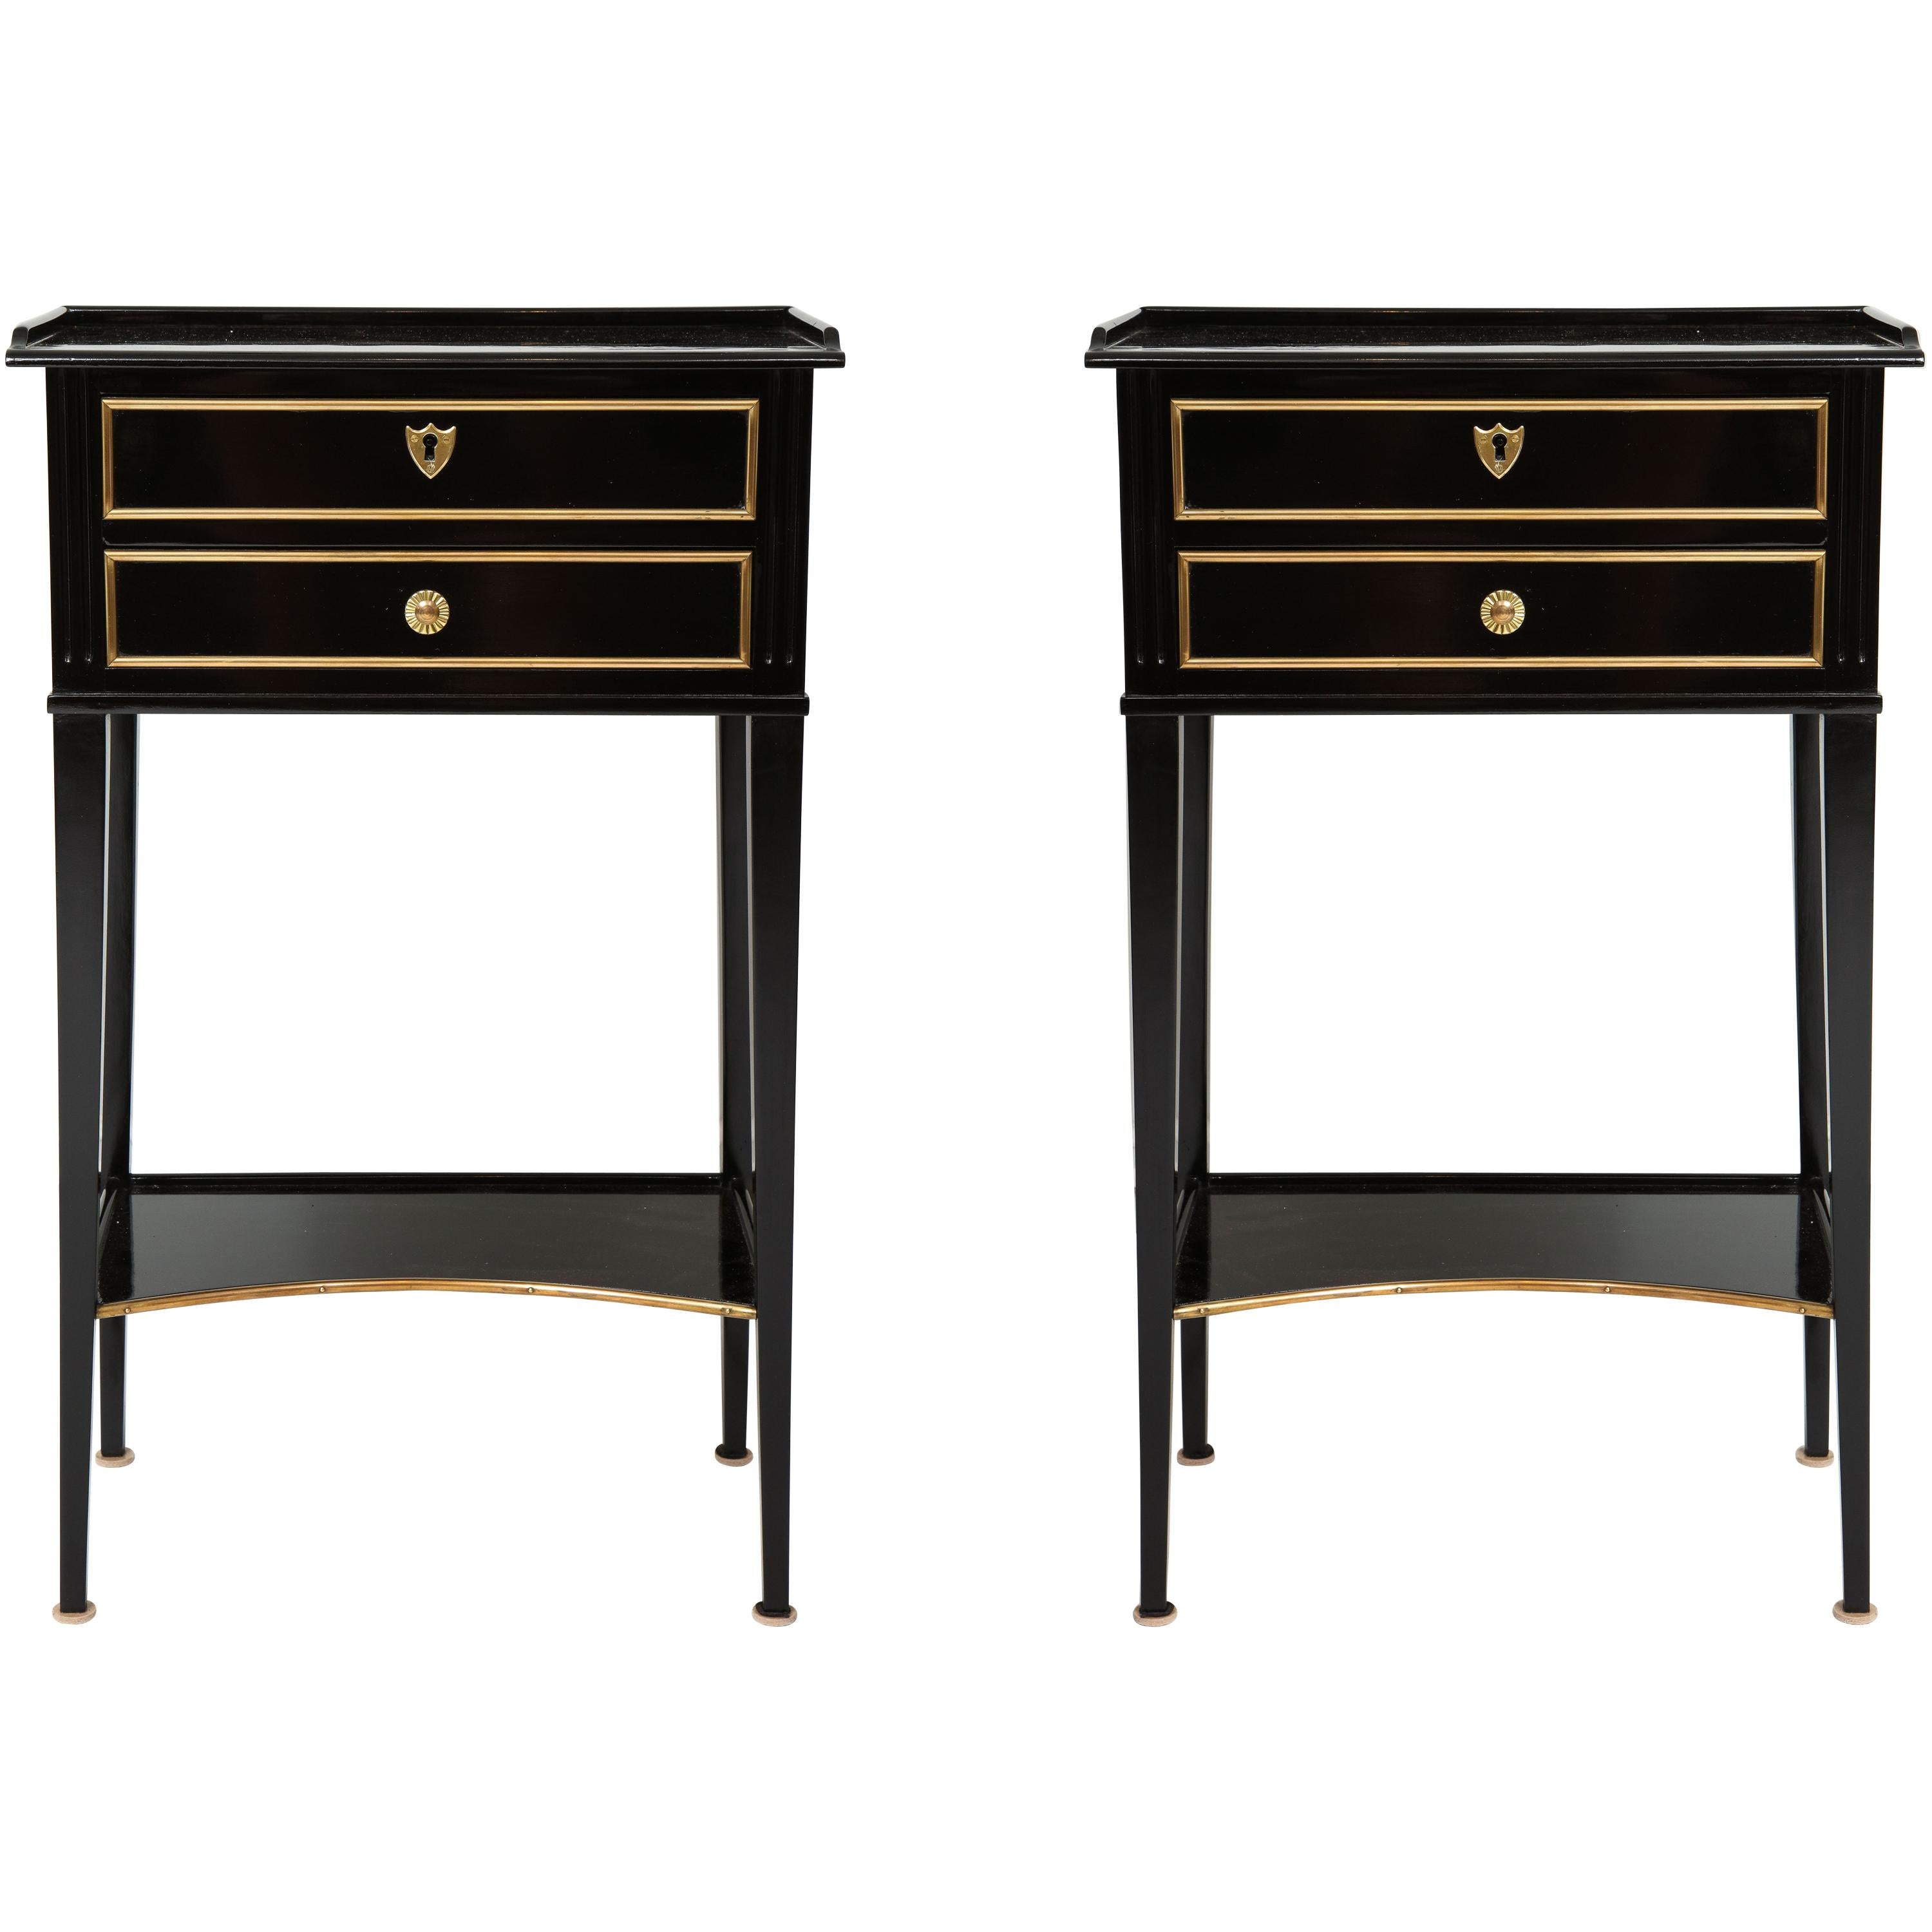 Pair of Ebonized Directoire-Style End Tables/ Nightstands with Bronze Trimming